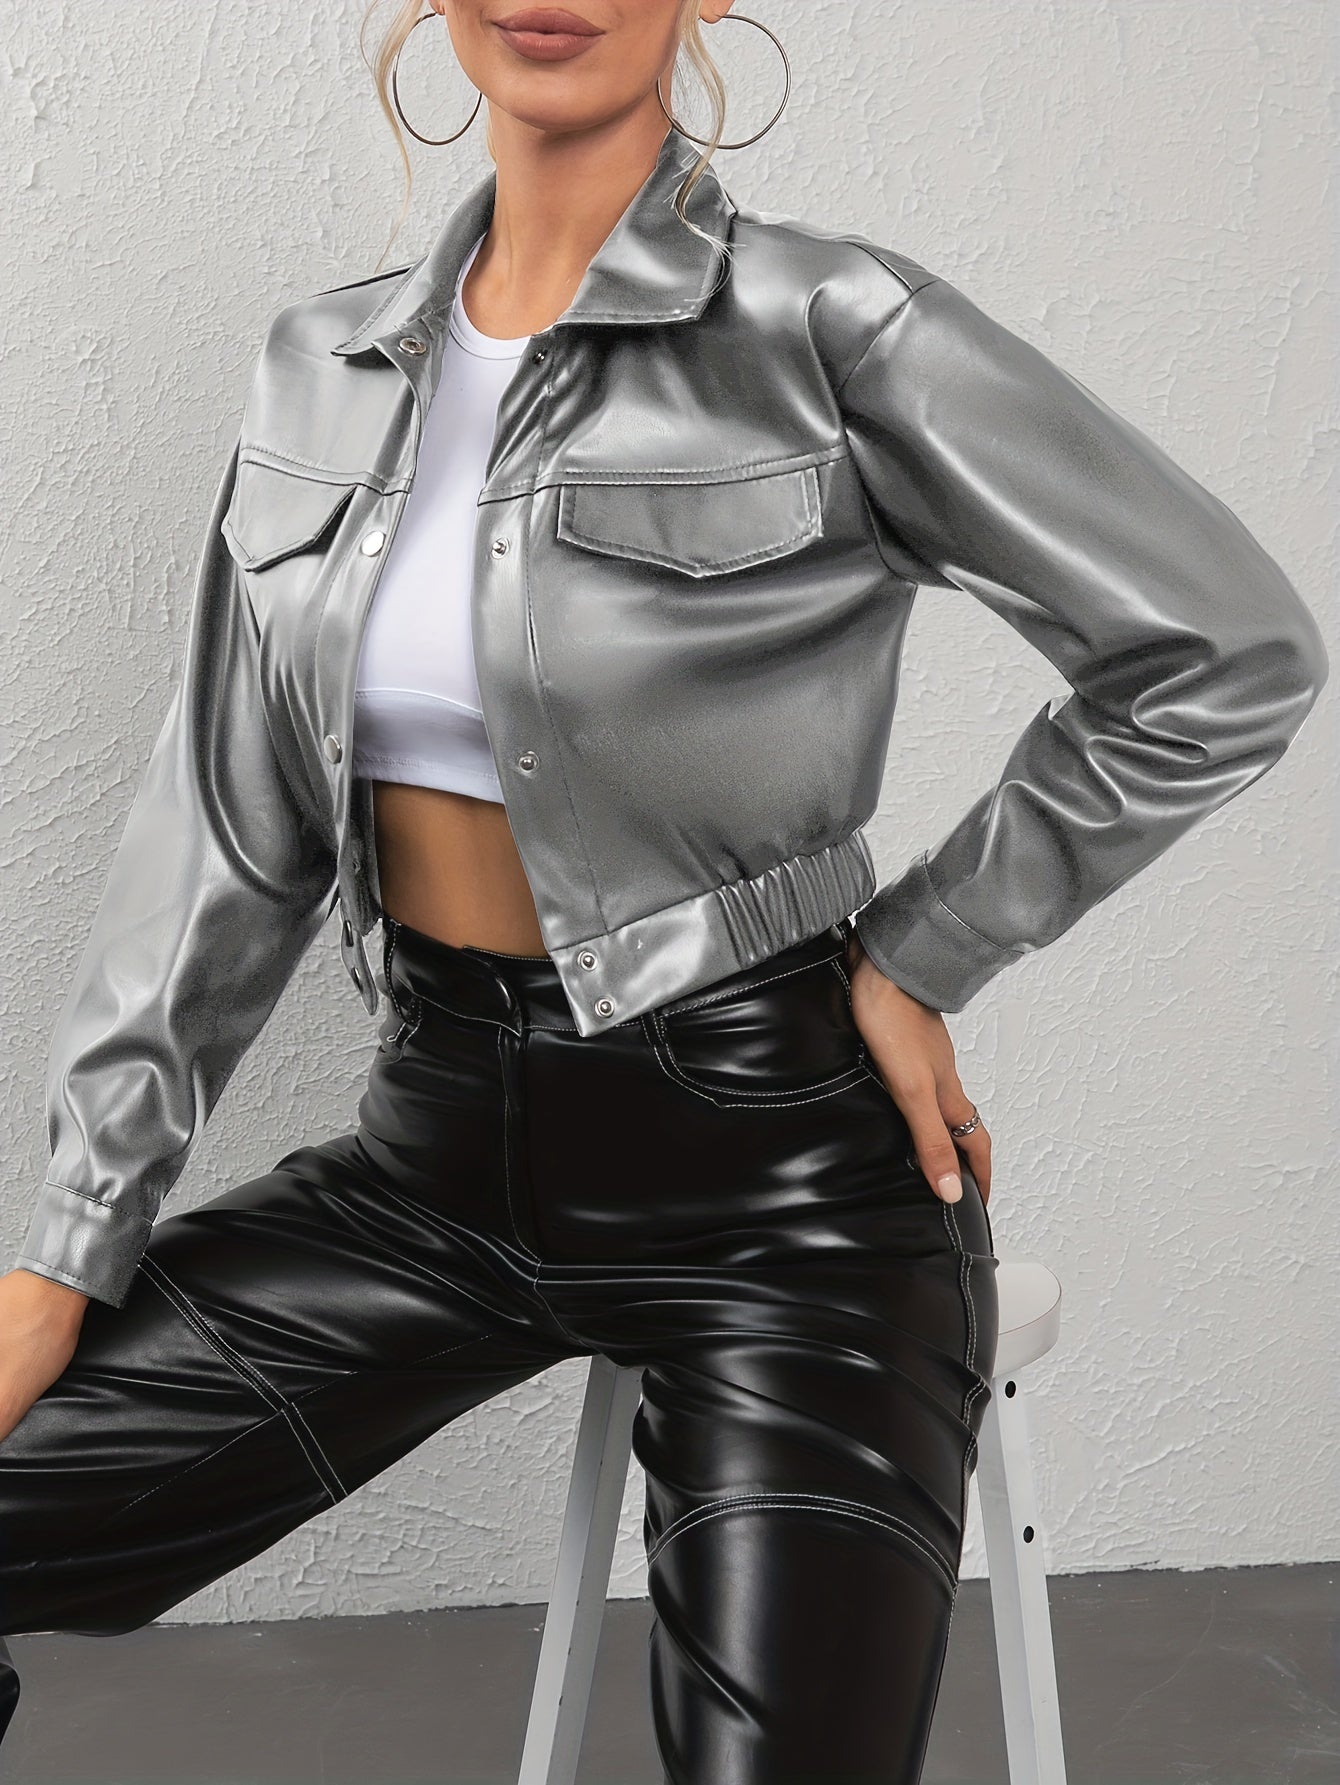 Antmvs Solid Turn Down Collar Faux Leather Crop Jacket, Casual Button Up Long Sleeve Outerwear, Women's Clothing